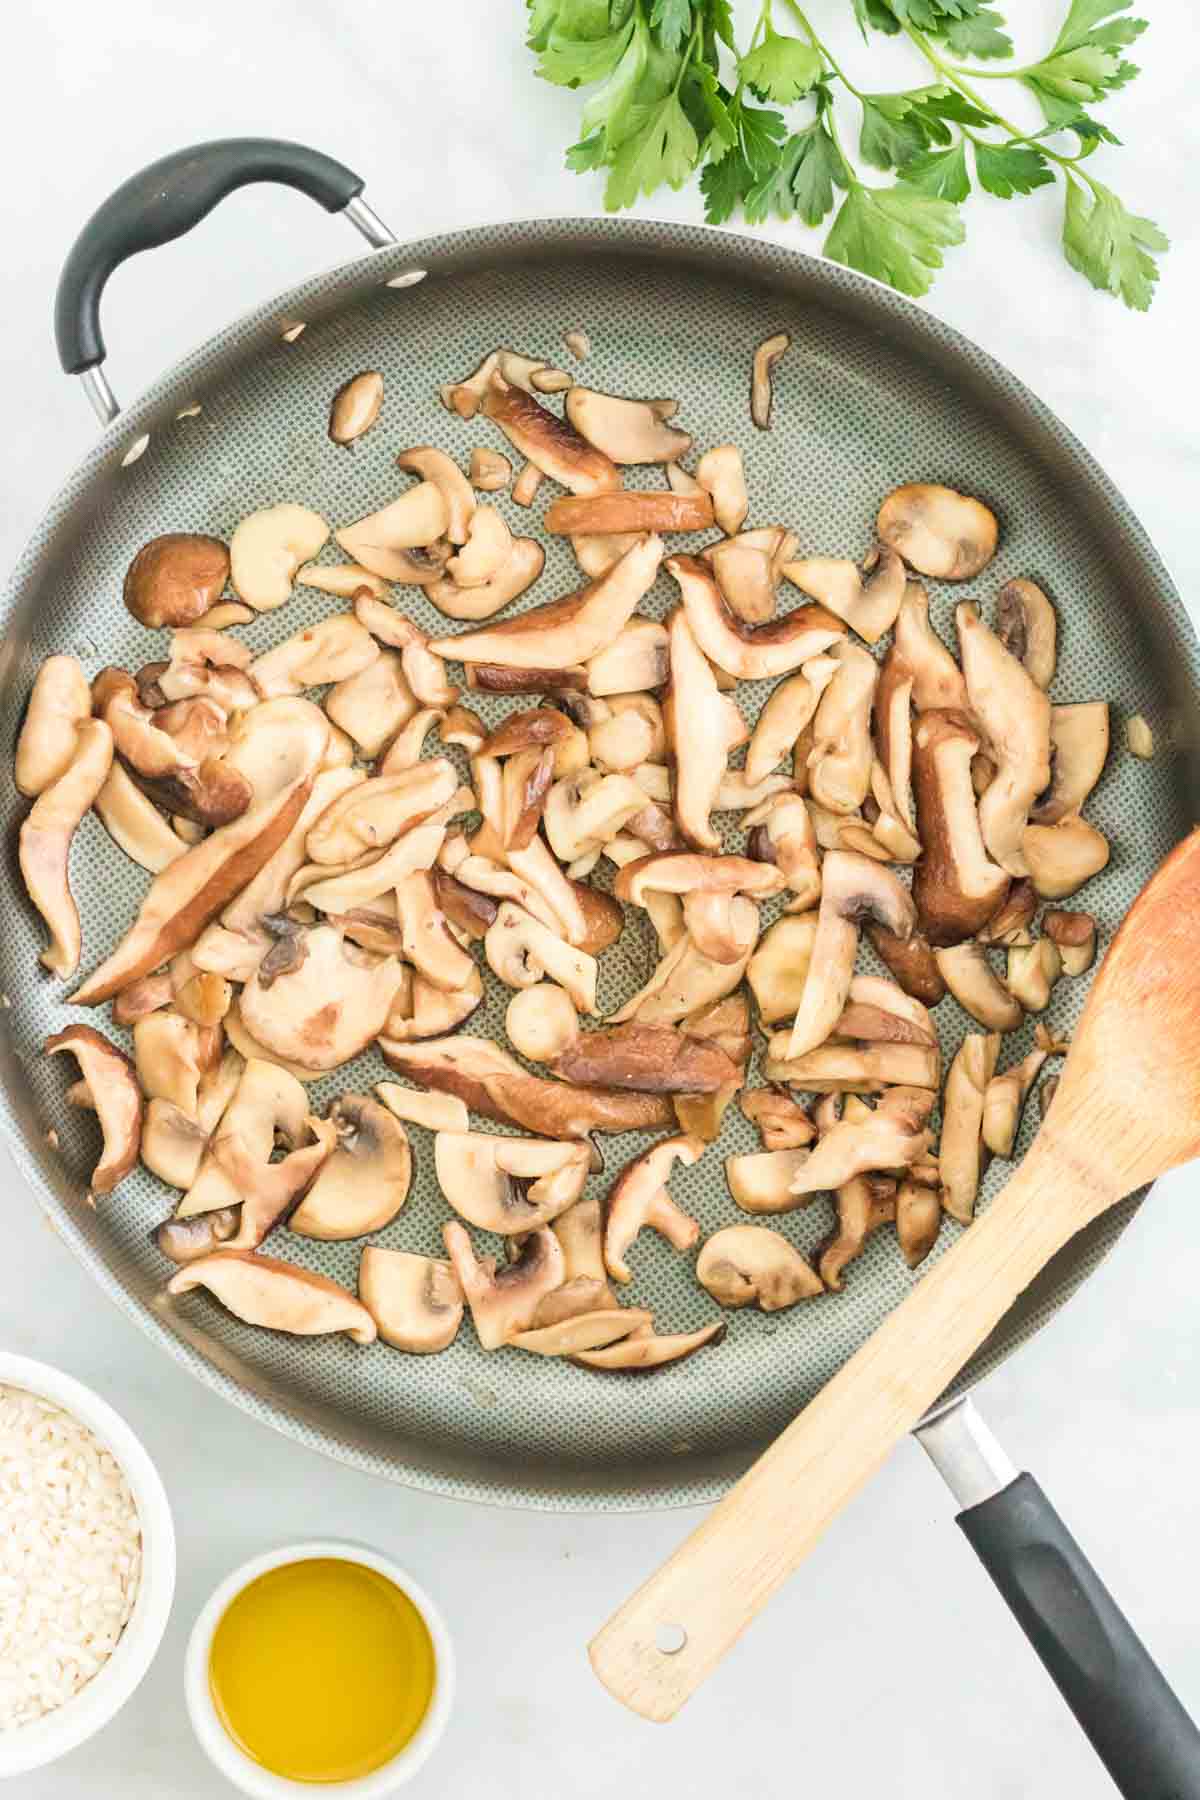 Sliced mushrooms sauteeing in a skillet next to a wooden spoon.